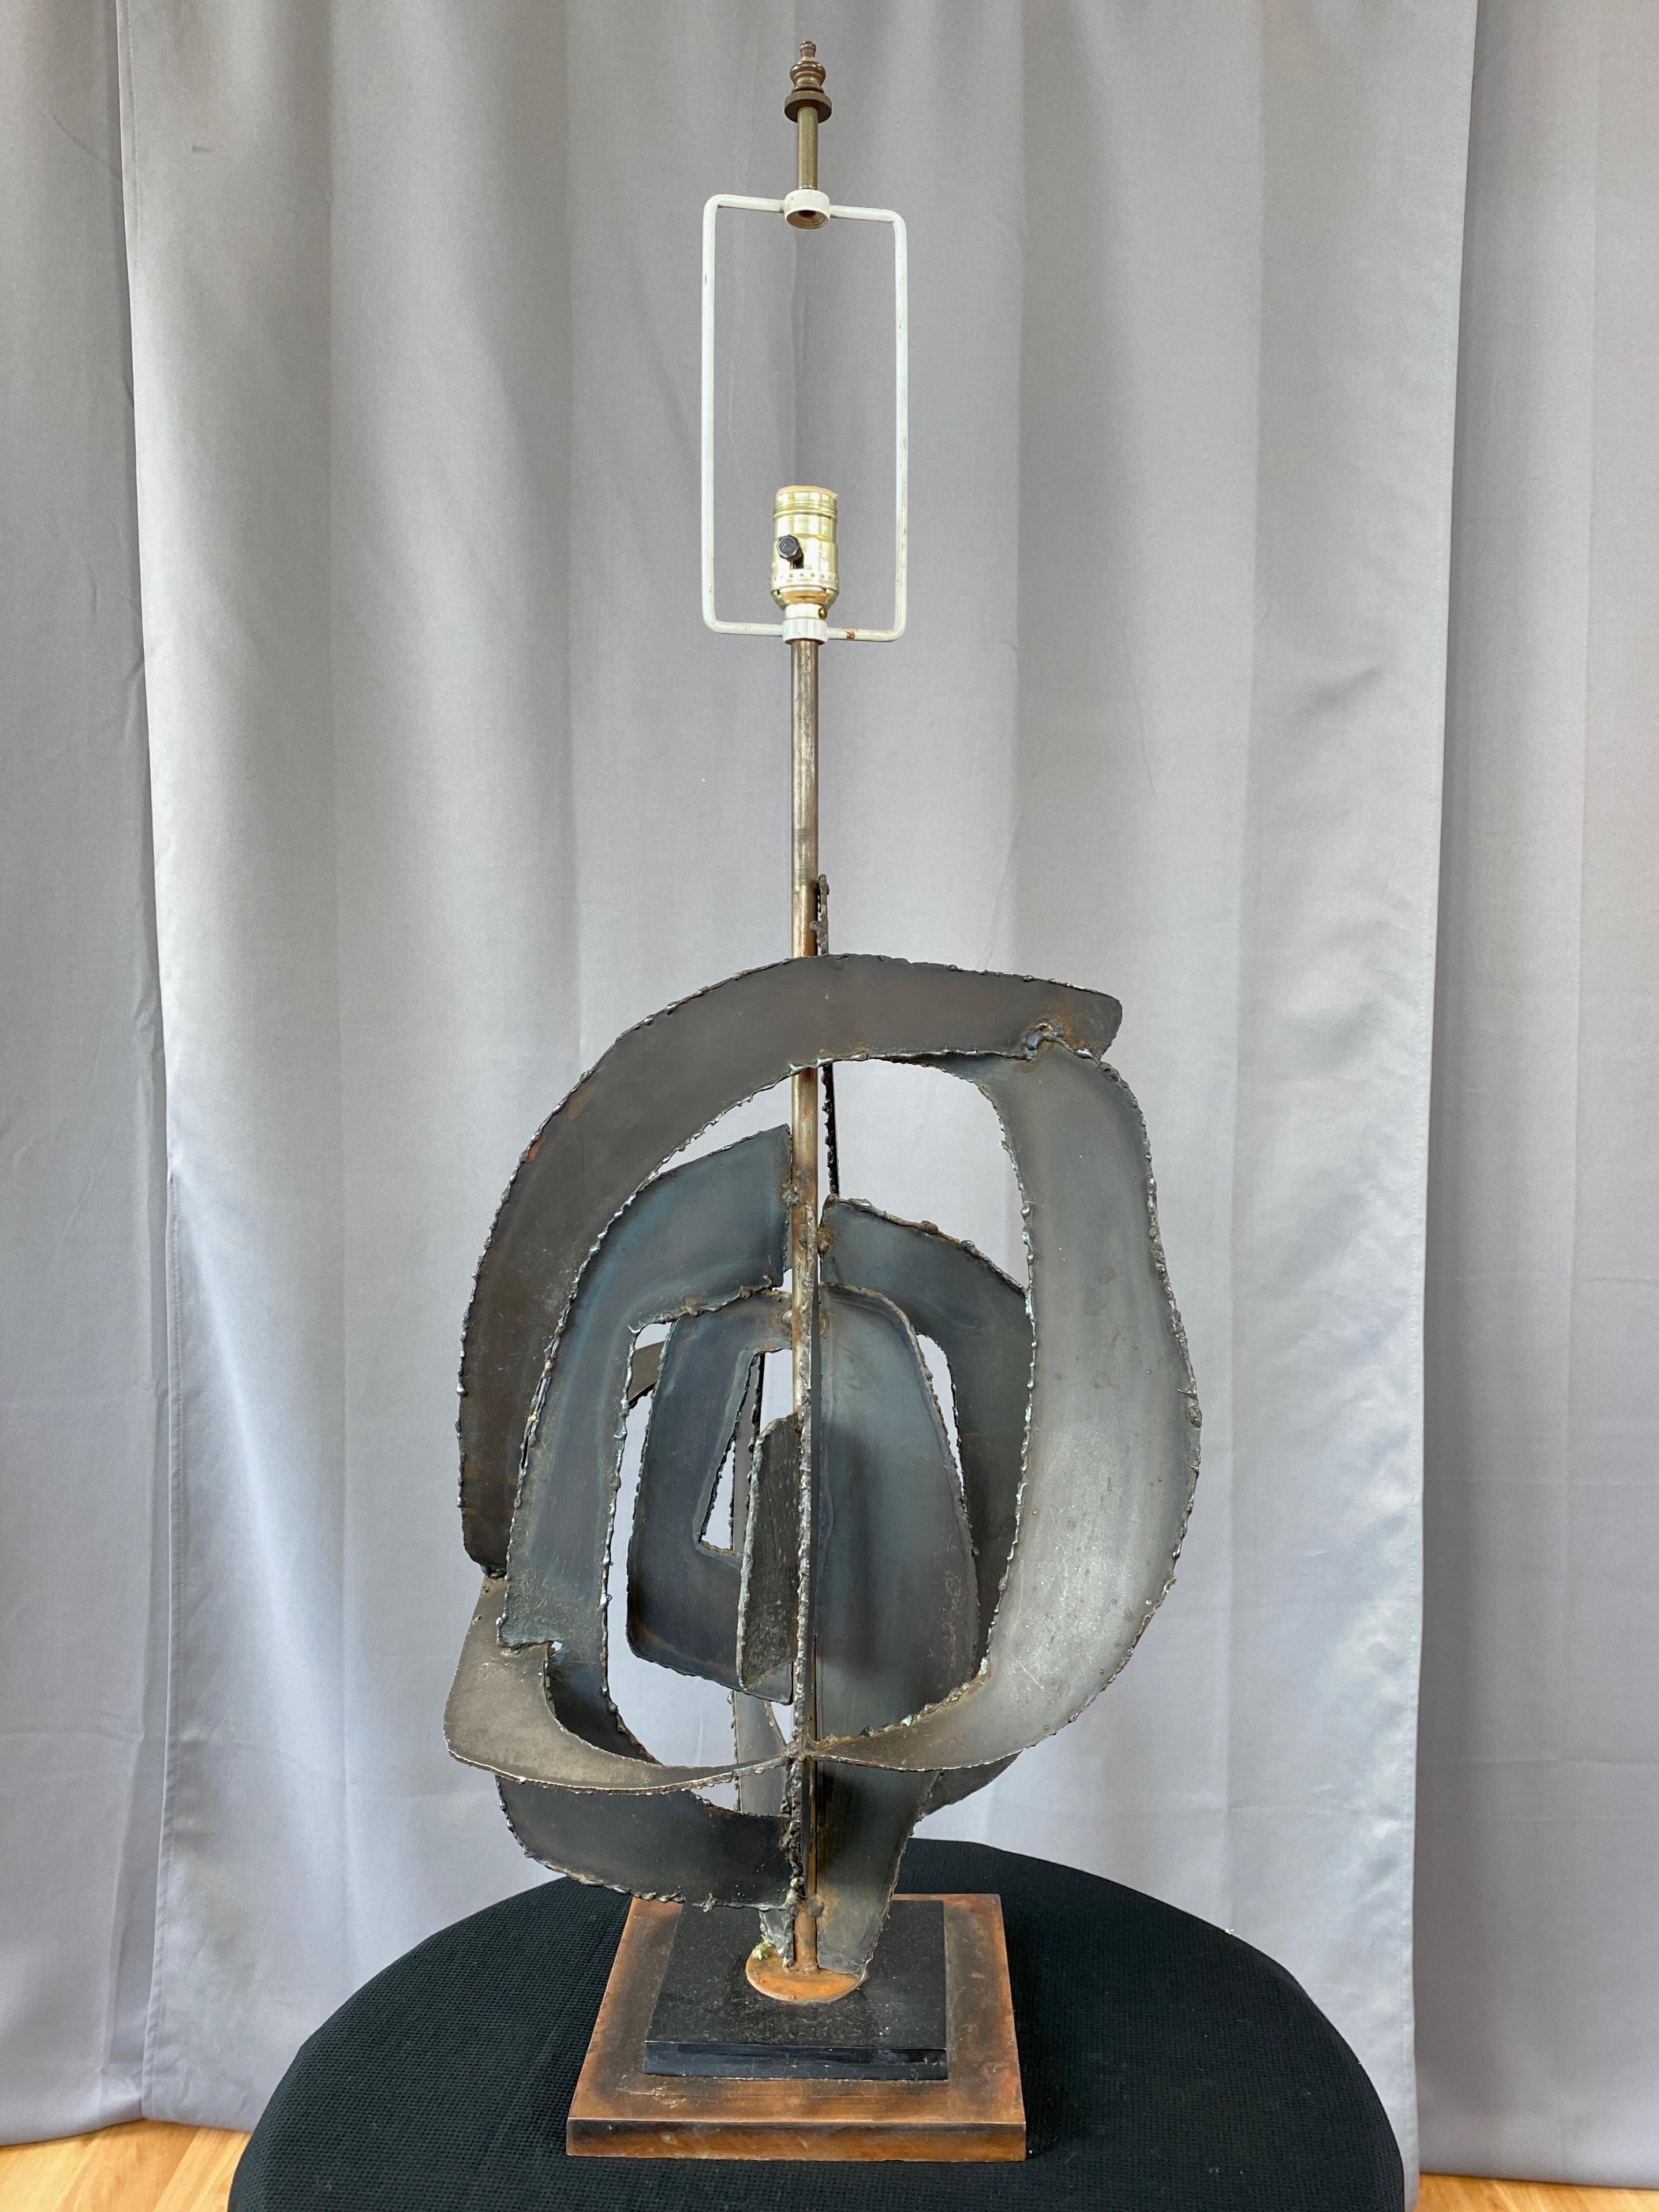 A very impressive early 1960s Brutalist steel and bronze finish table lamp from Richard Barr’s Studio Collection for Laurel Lamp.

Large and sculptural multiplanar body of torch cut steel plates with a dark finish described by Laurel Lamp as